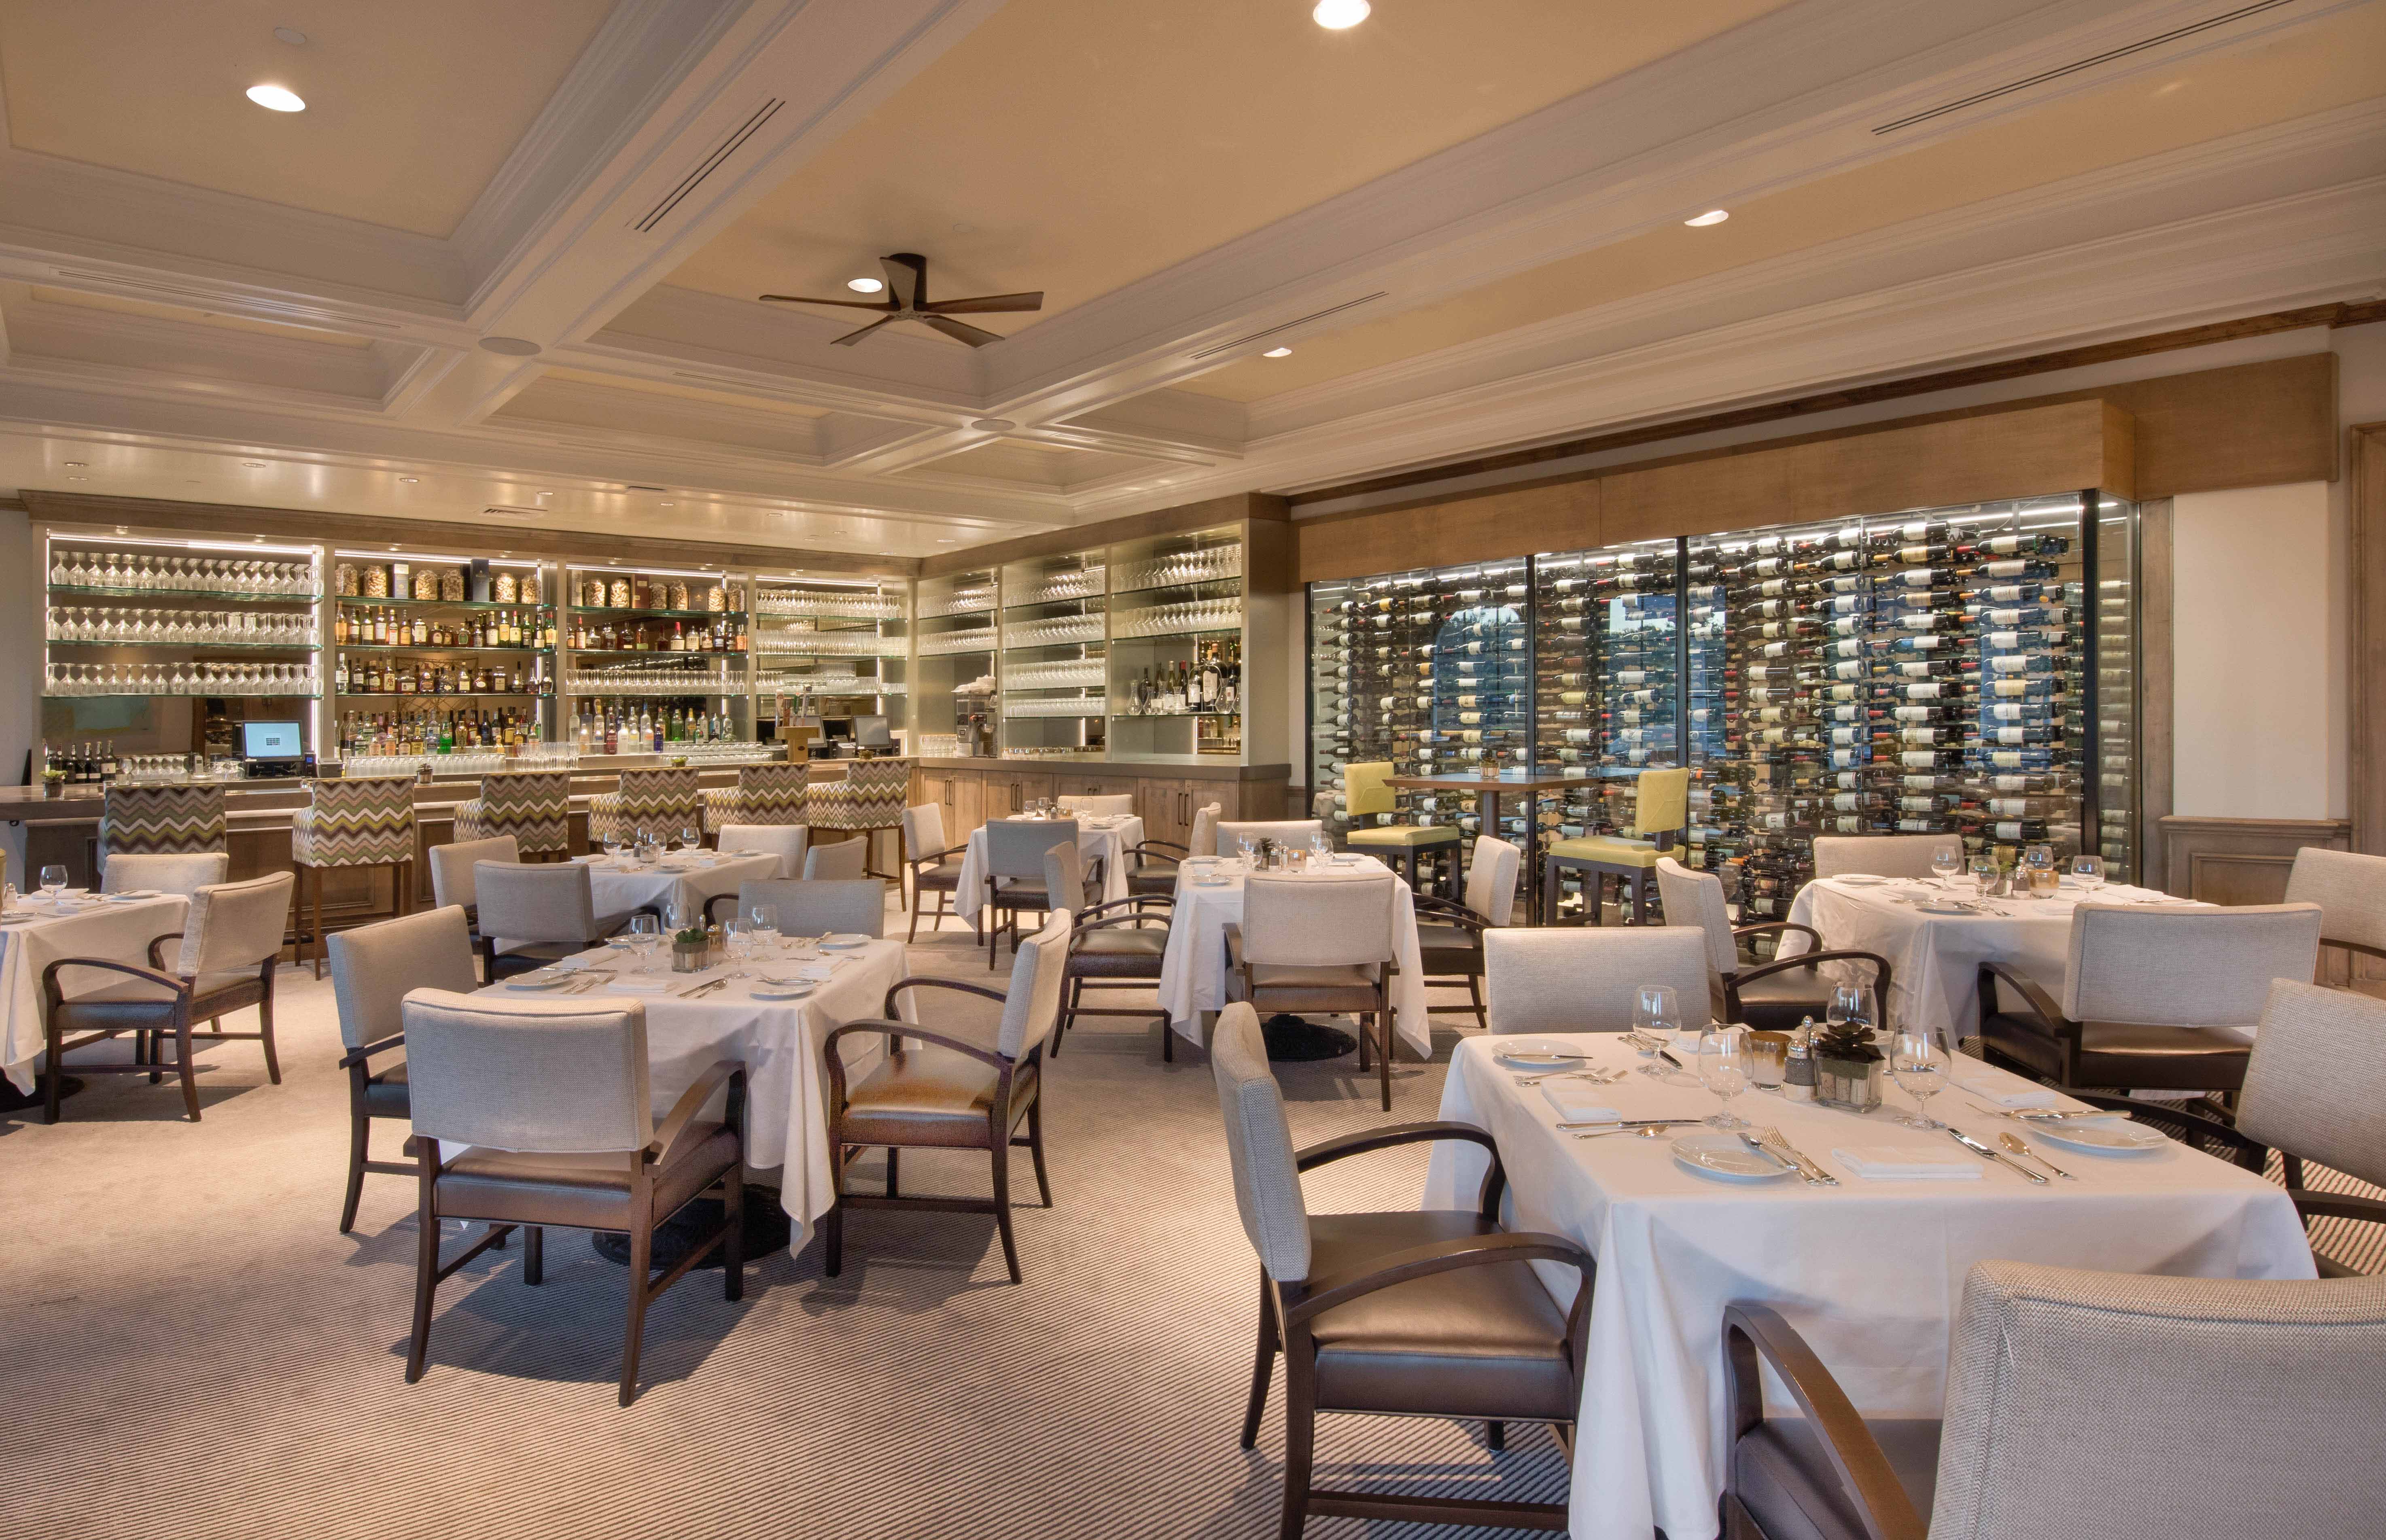 johns island club remodel includes a luxurious restaurant and bar designed by j banks design